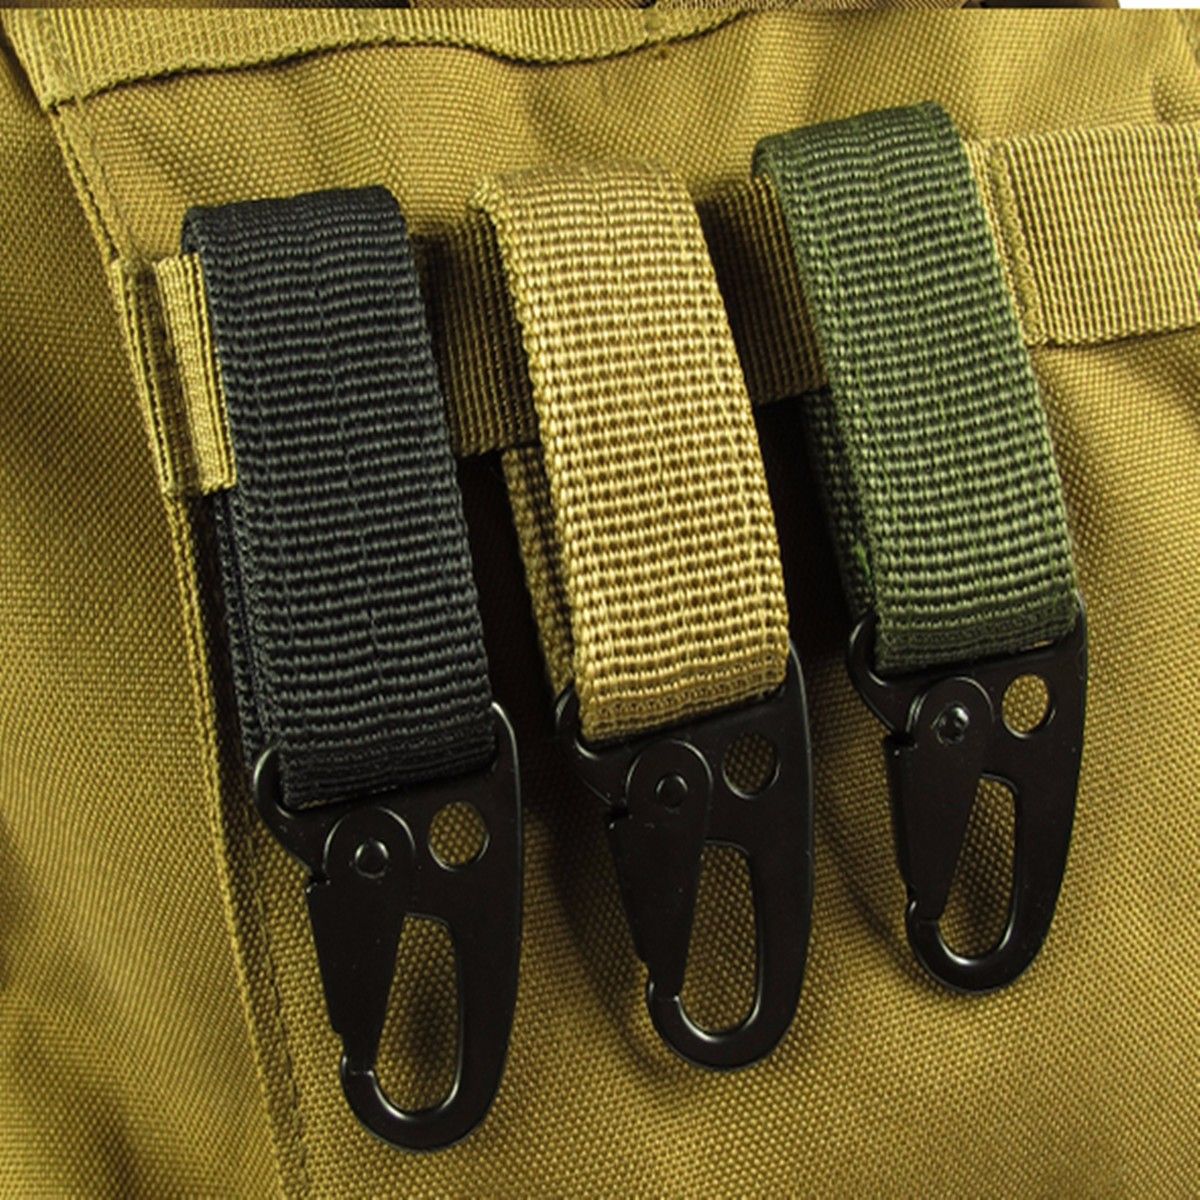 Colorful-Climbing-Tactical-Ring-Tactical-Keychain-Buckle-Clip-Holder-1034750